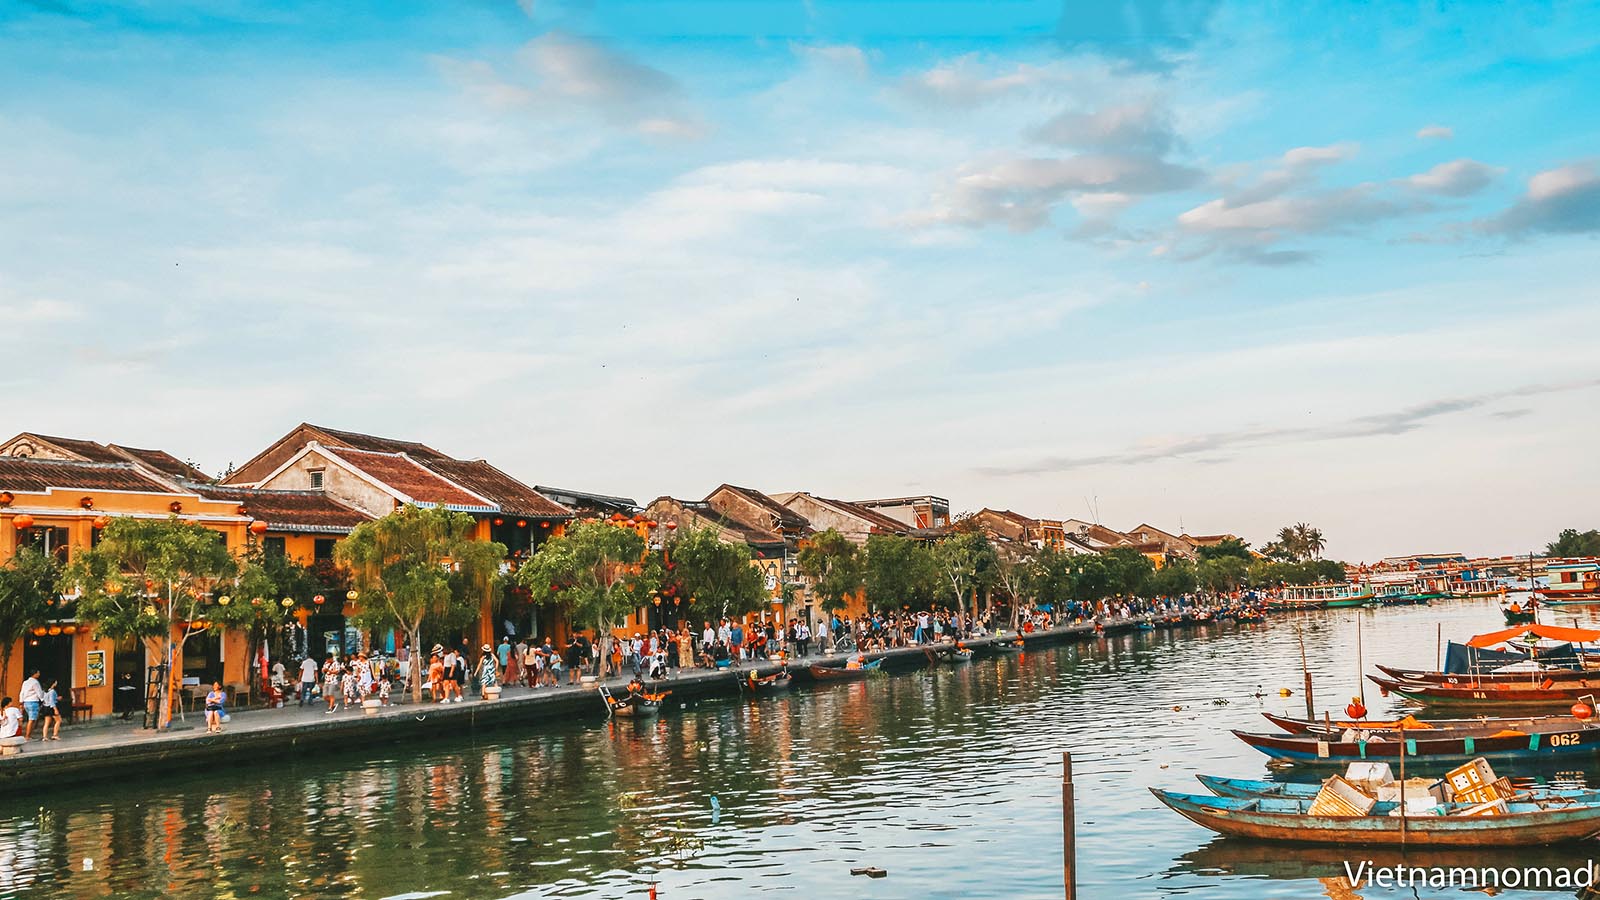 Ultimate Hoi An Travel Guide. The Travel Guide